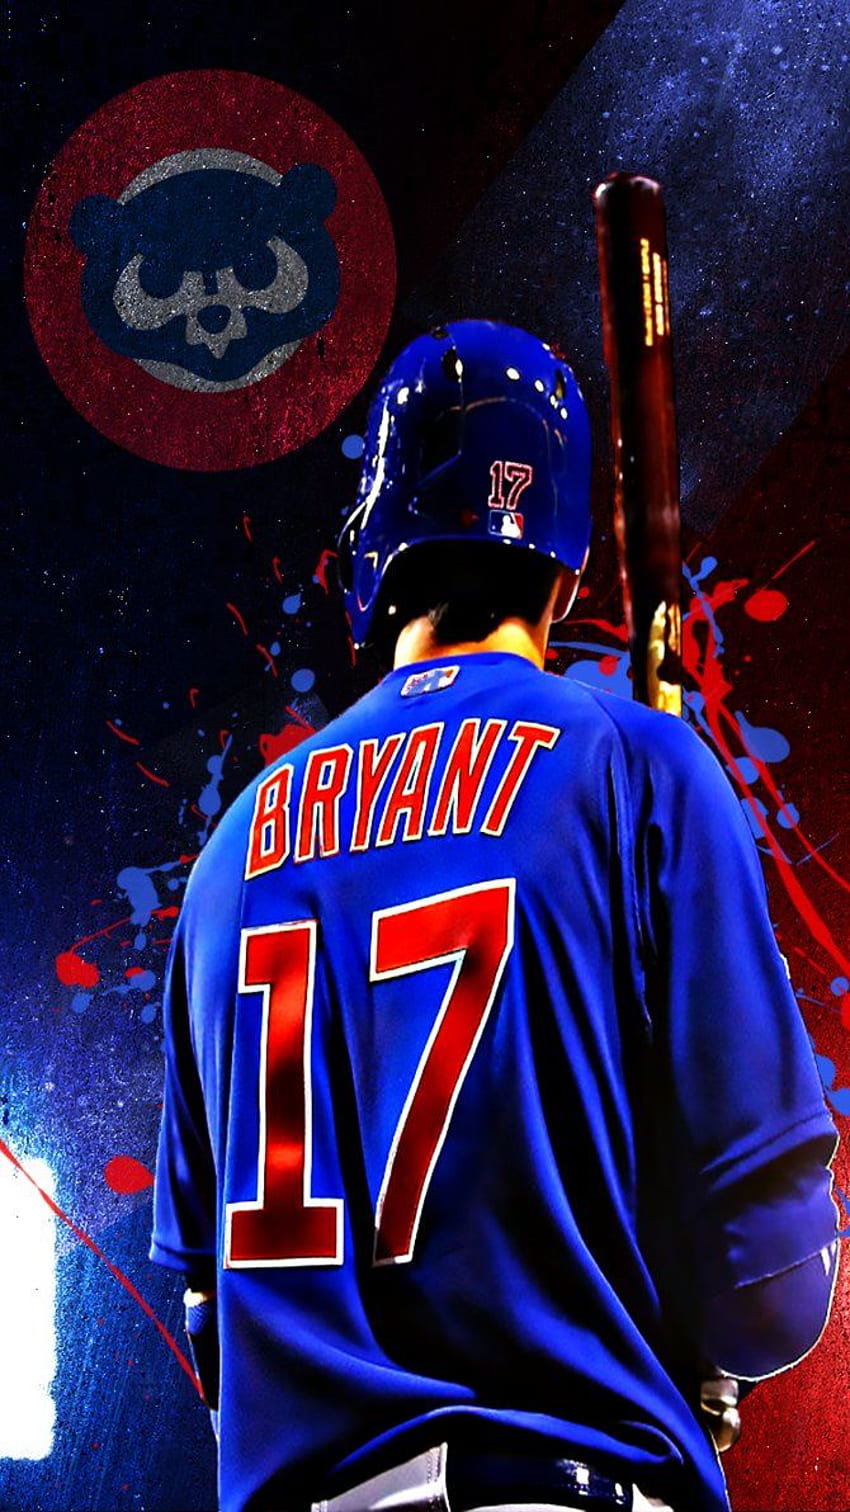 Download wallpapers 4k Kris Bryant grunge art MLB Chicago Cubs  baseman baseball Kristopher Lee Bryant Major League Baseball blue  abstract rays Kris Bryant Chicago Cubs Kris Bryant 4K for desktop with  resolution